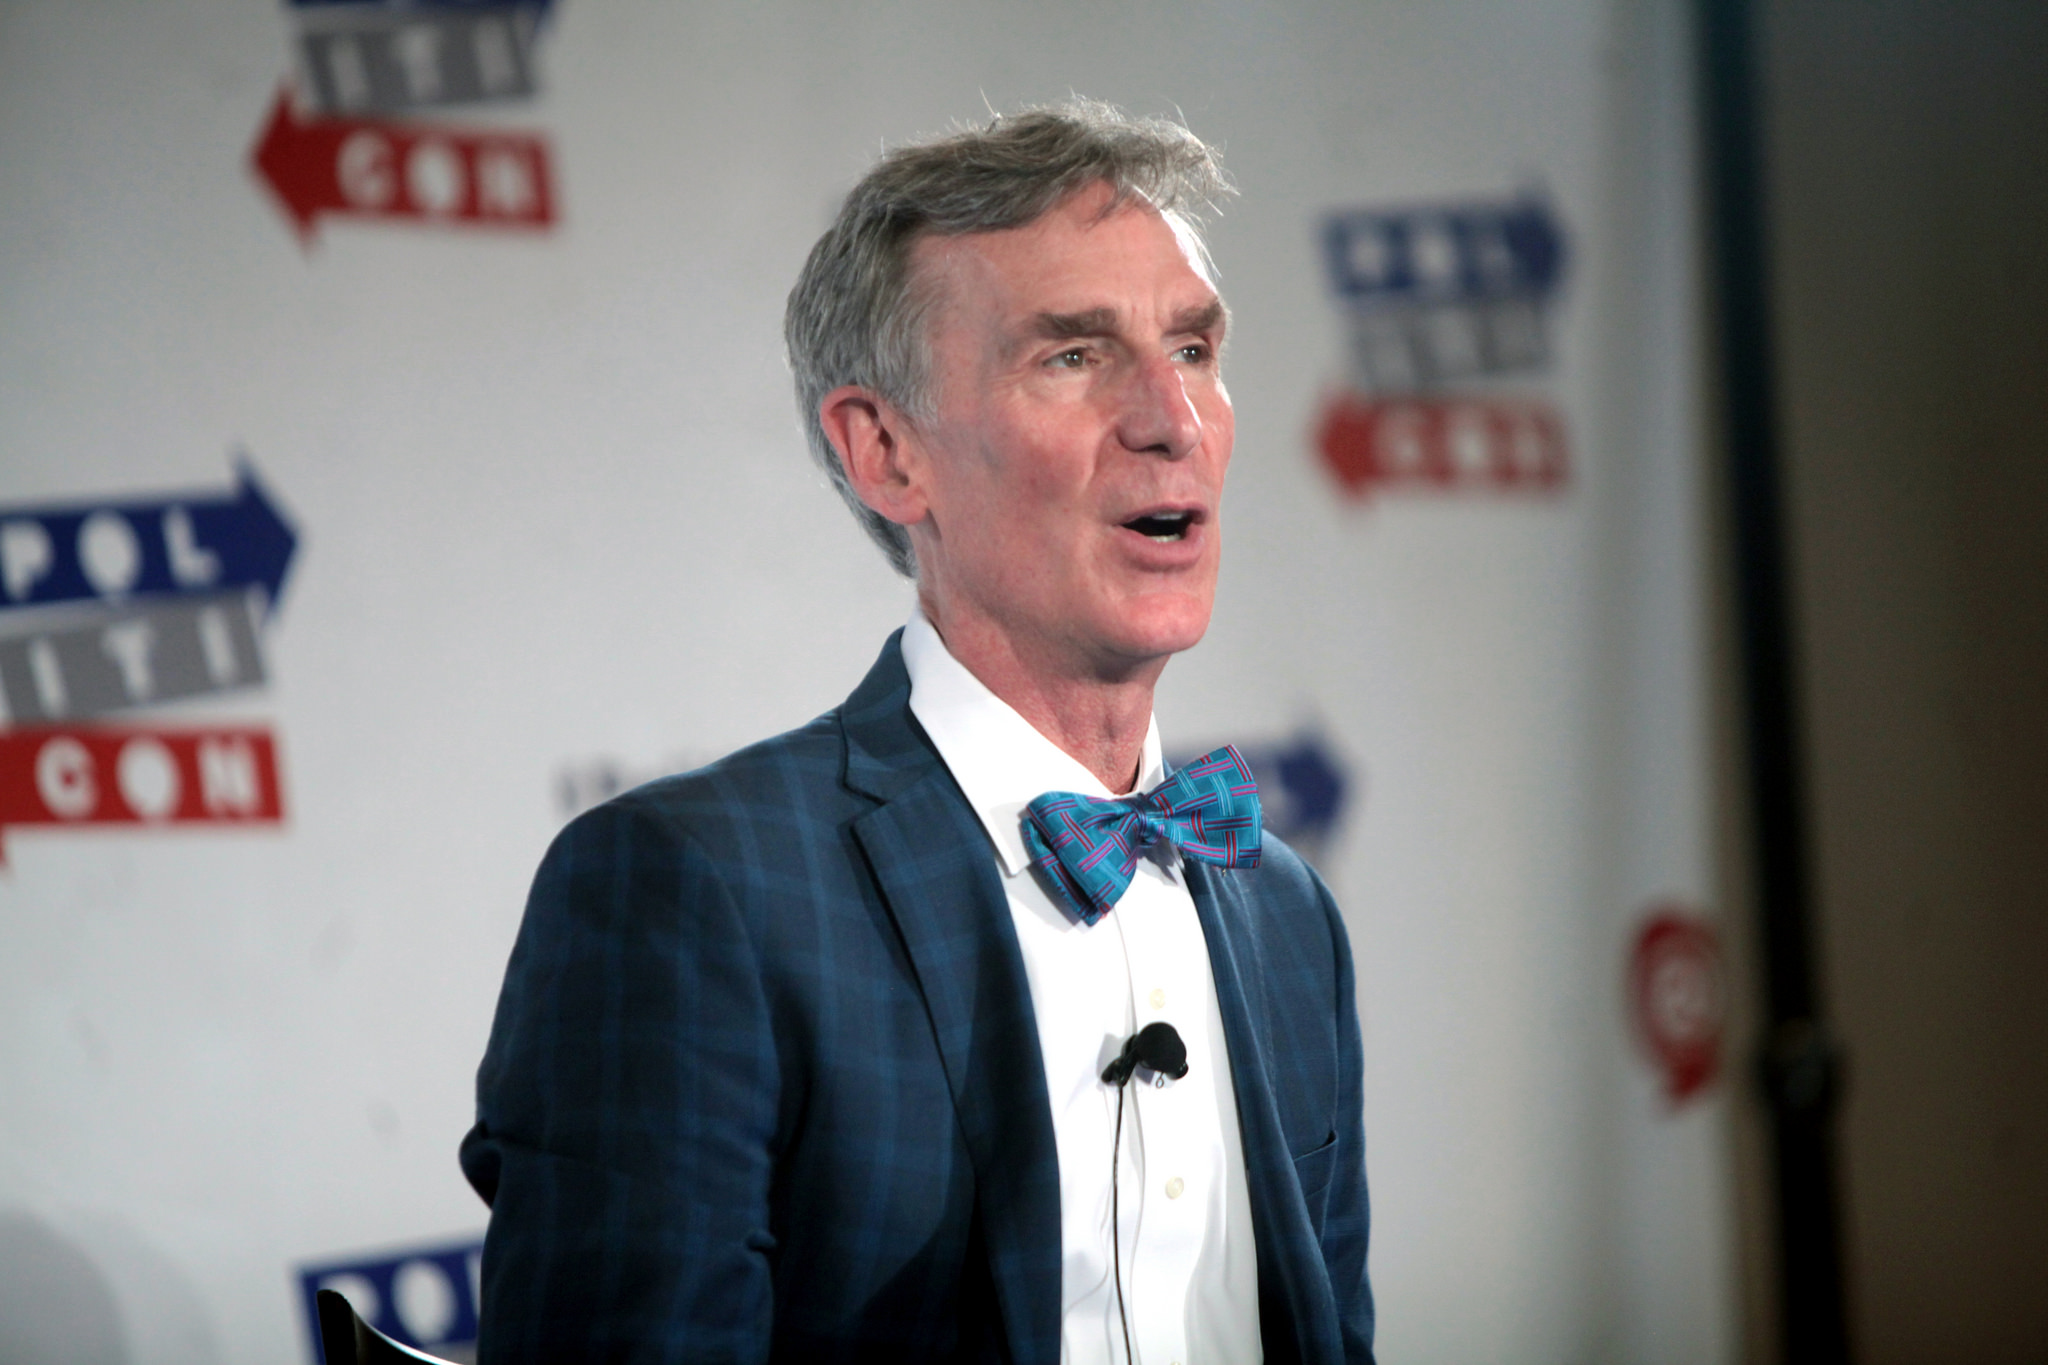 Bill Nye talking while wearing a blue suit